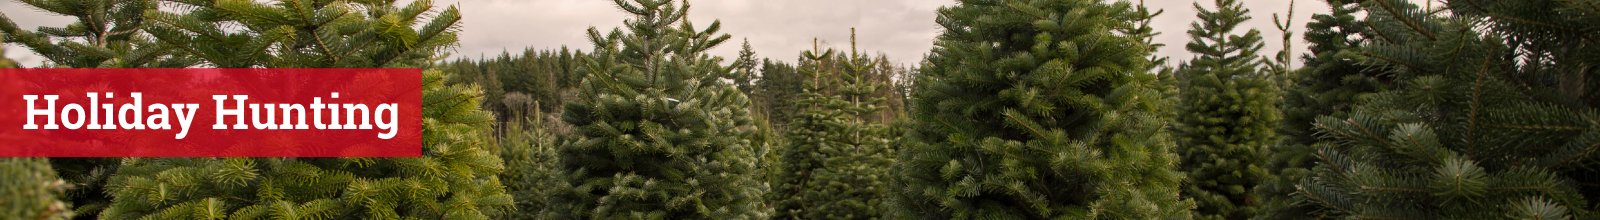 Christmas Tree Farm with text: Holiday Hunting